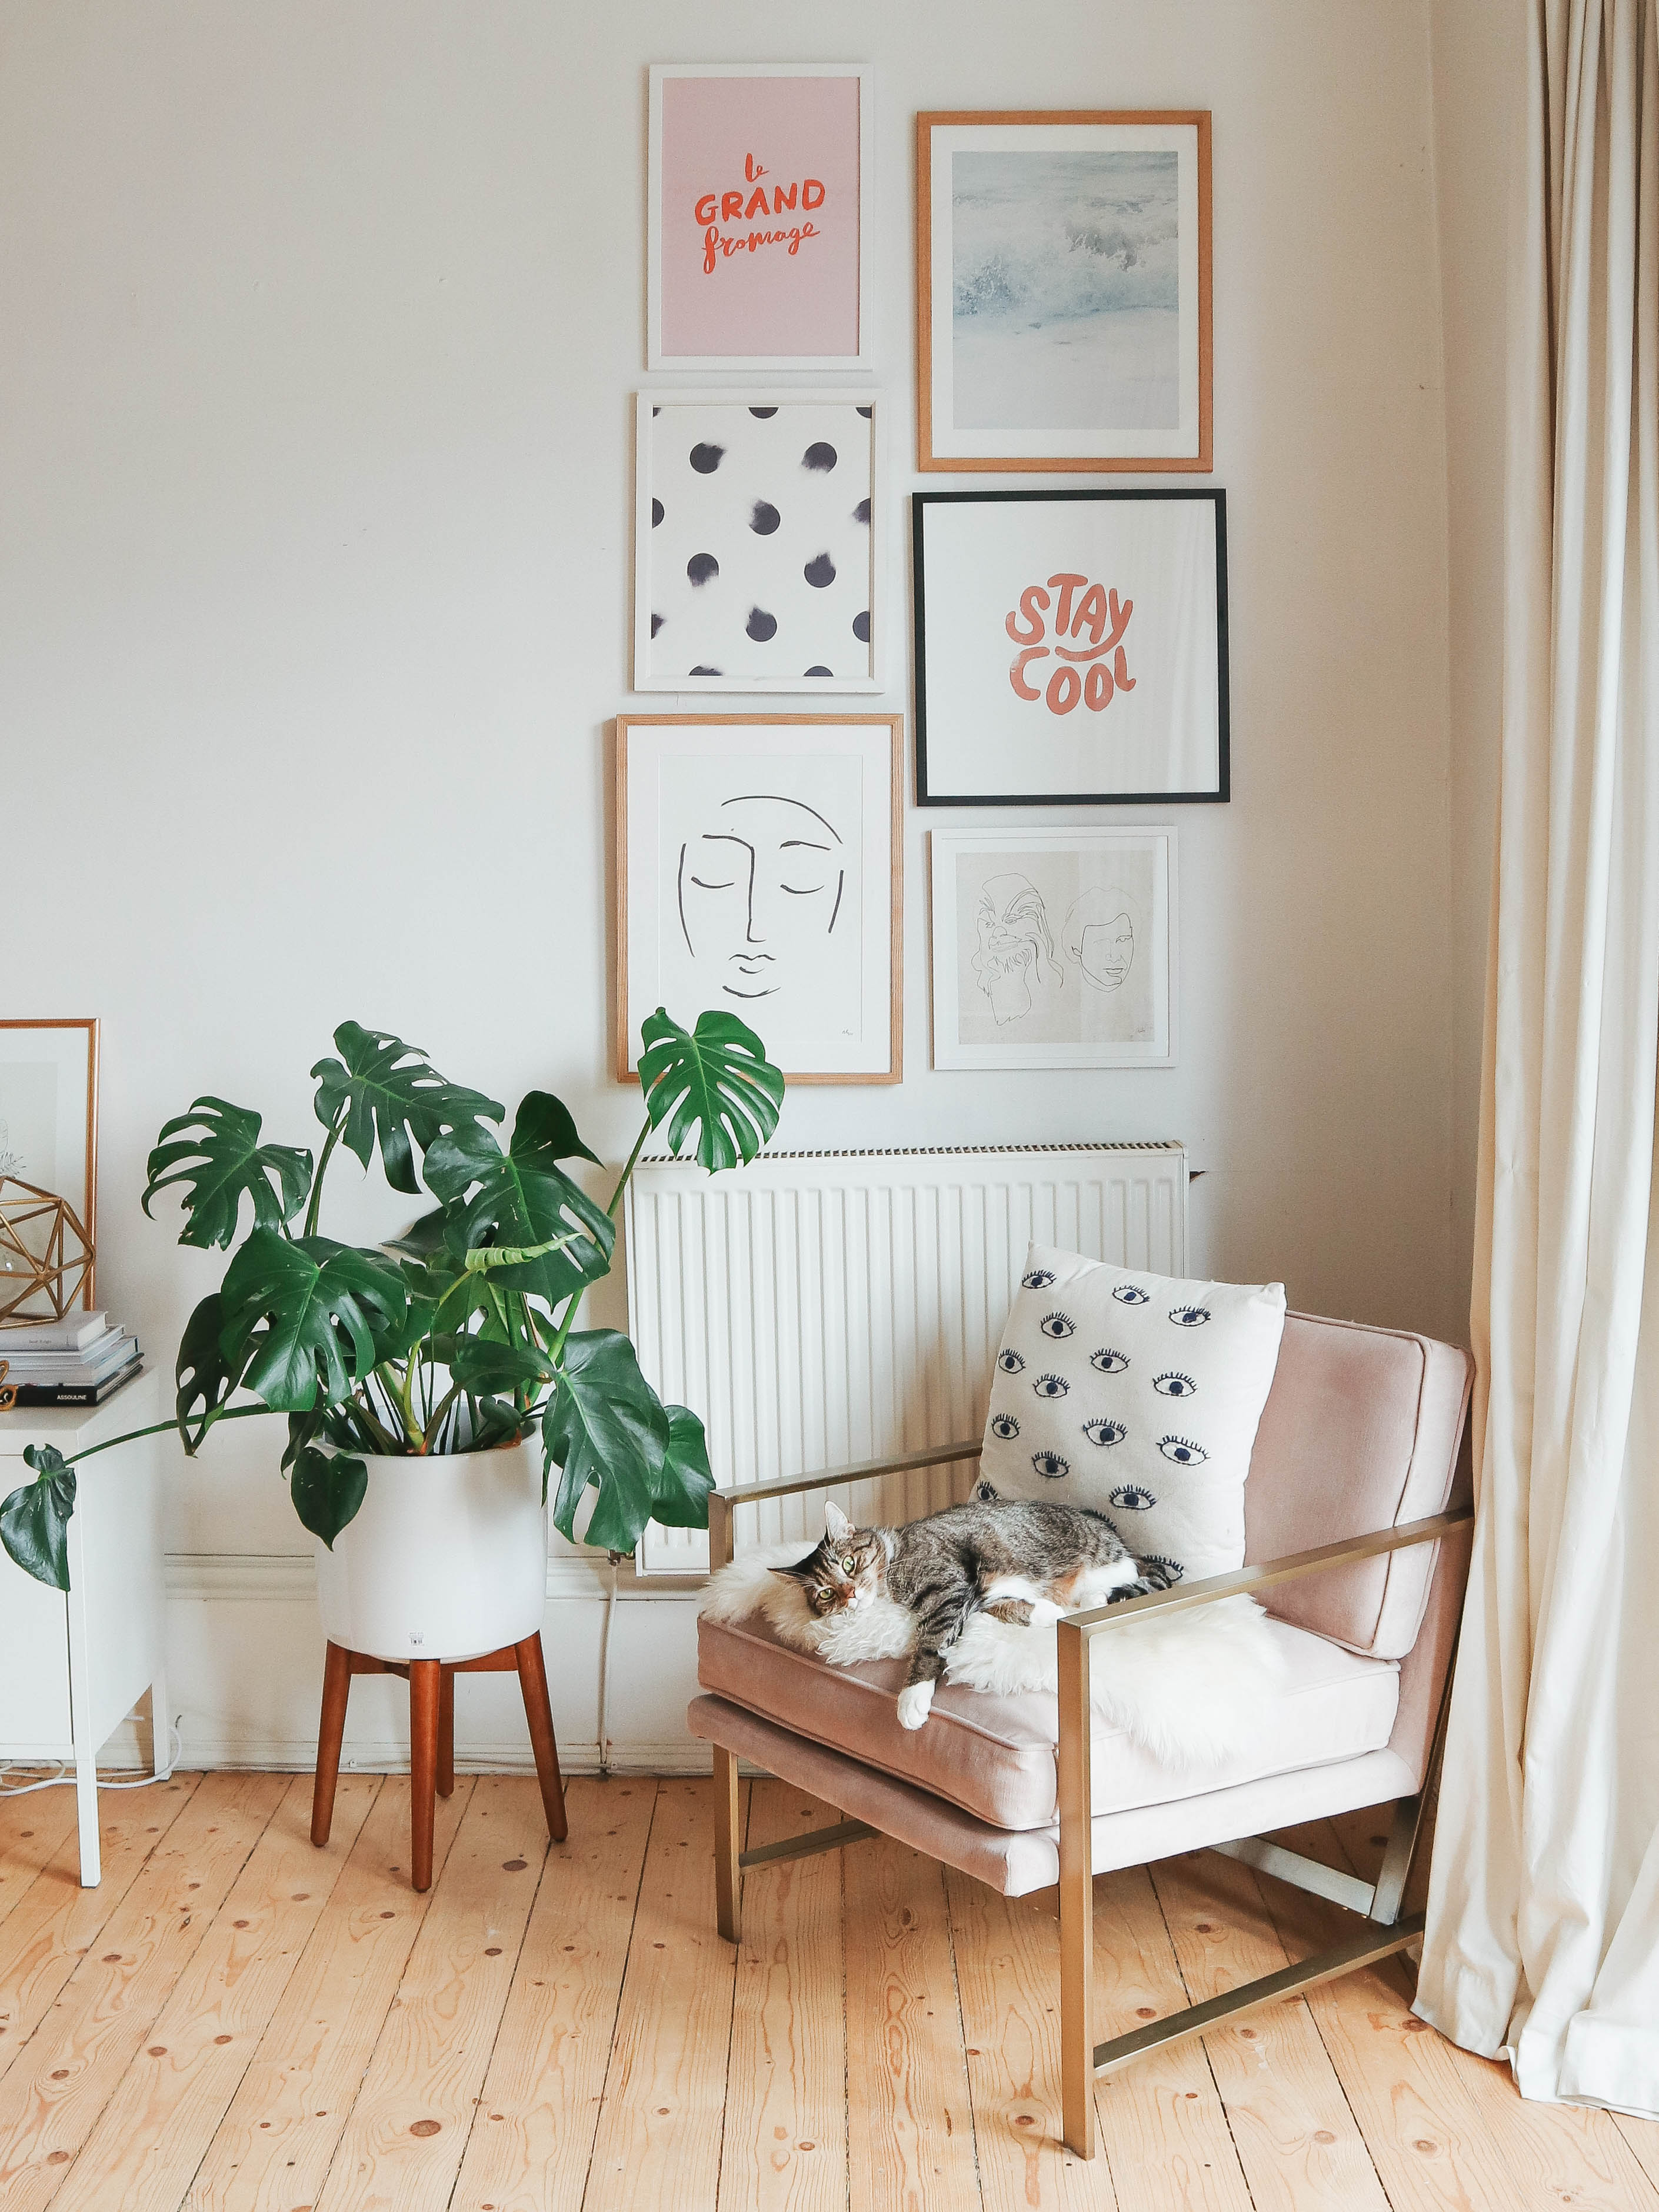 My Five Favourite Corners Of My Home. - KATE LA VIE by Kate Spiers